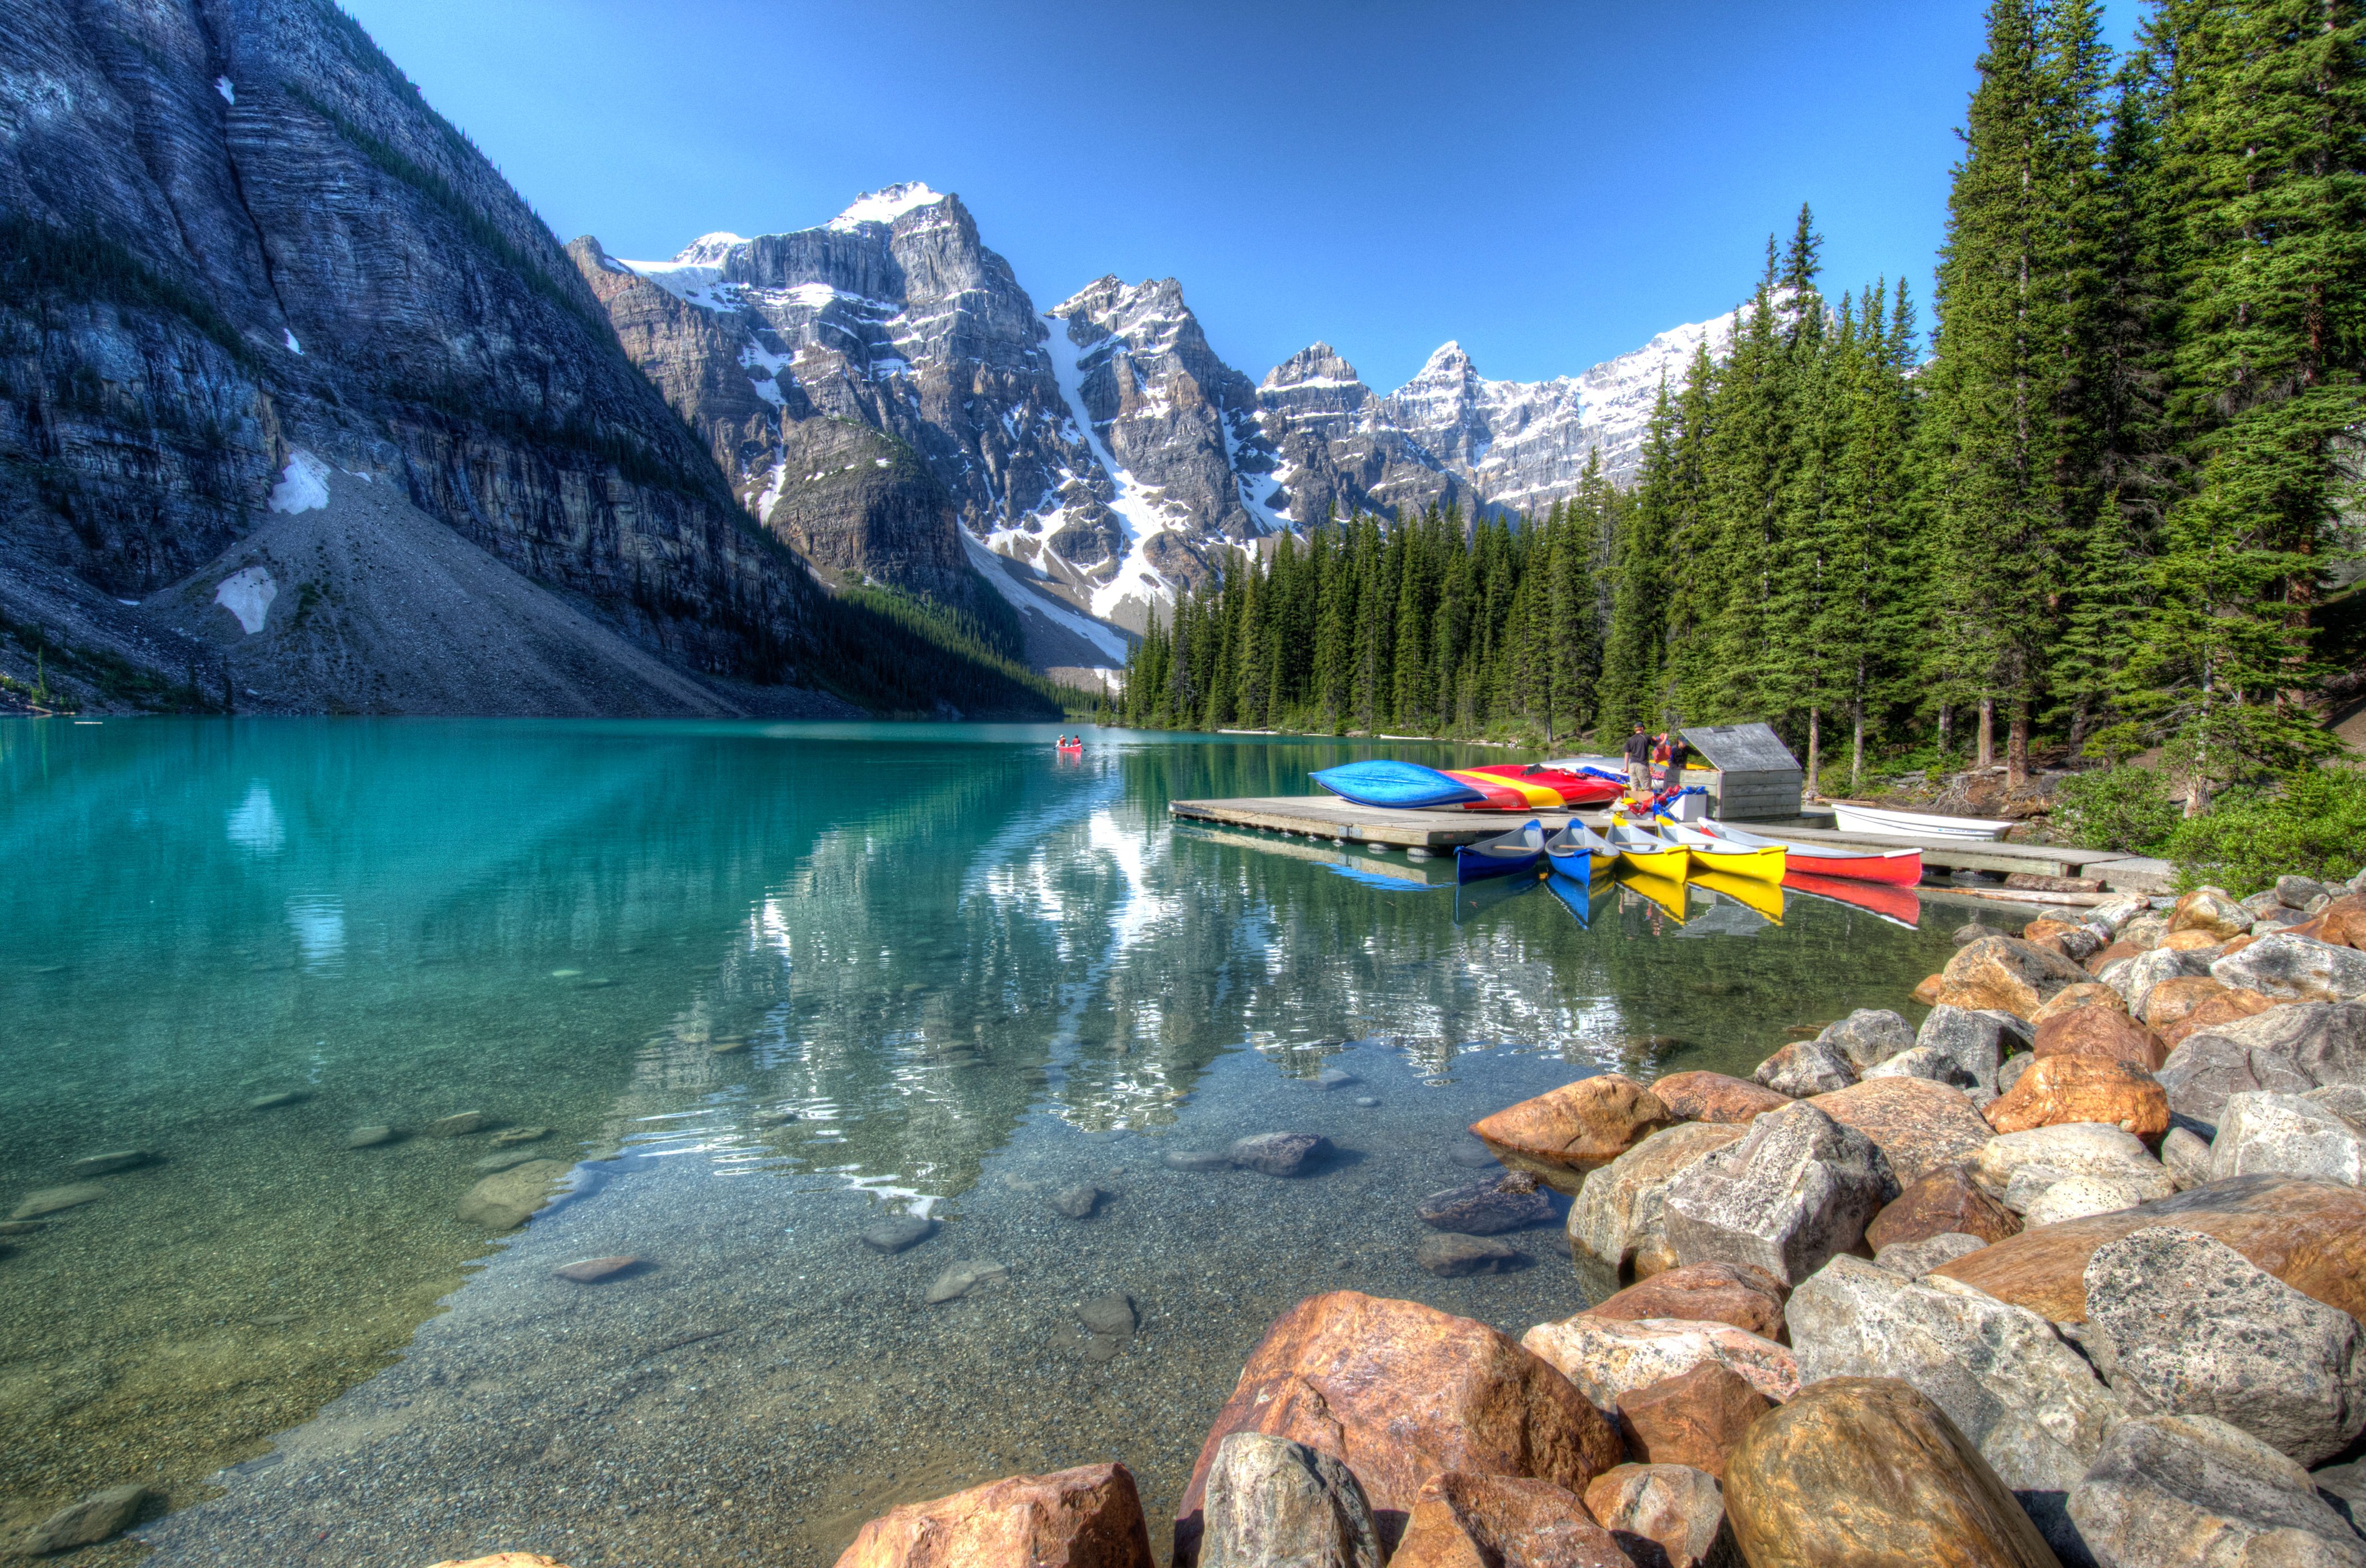 canada, Parks, Mountains, Lake, Stones, Boats, Forests, Scenery, Banff, Moraine, Lake, Nature Wallpaper